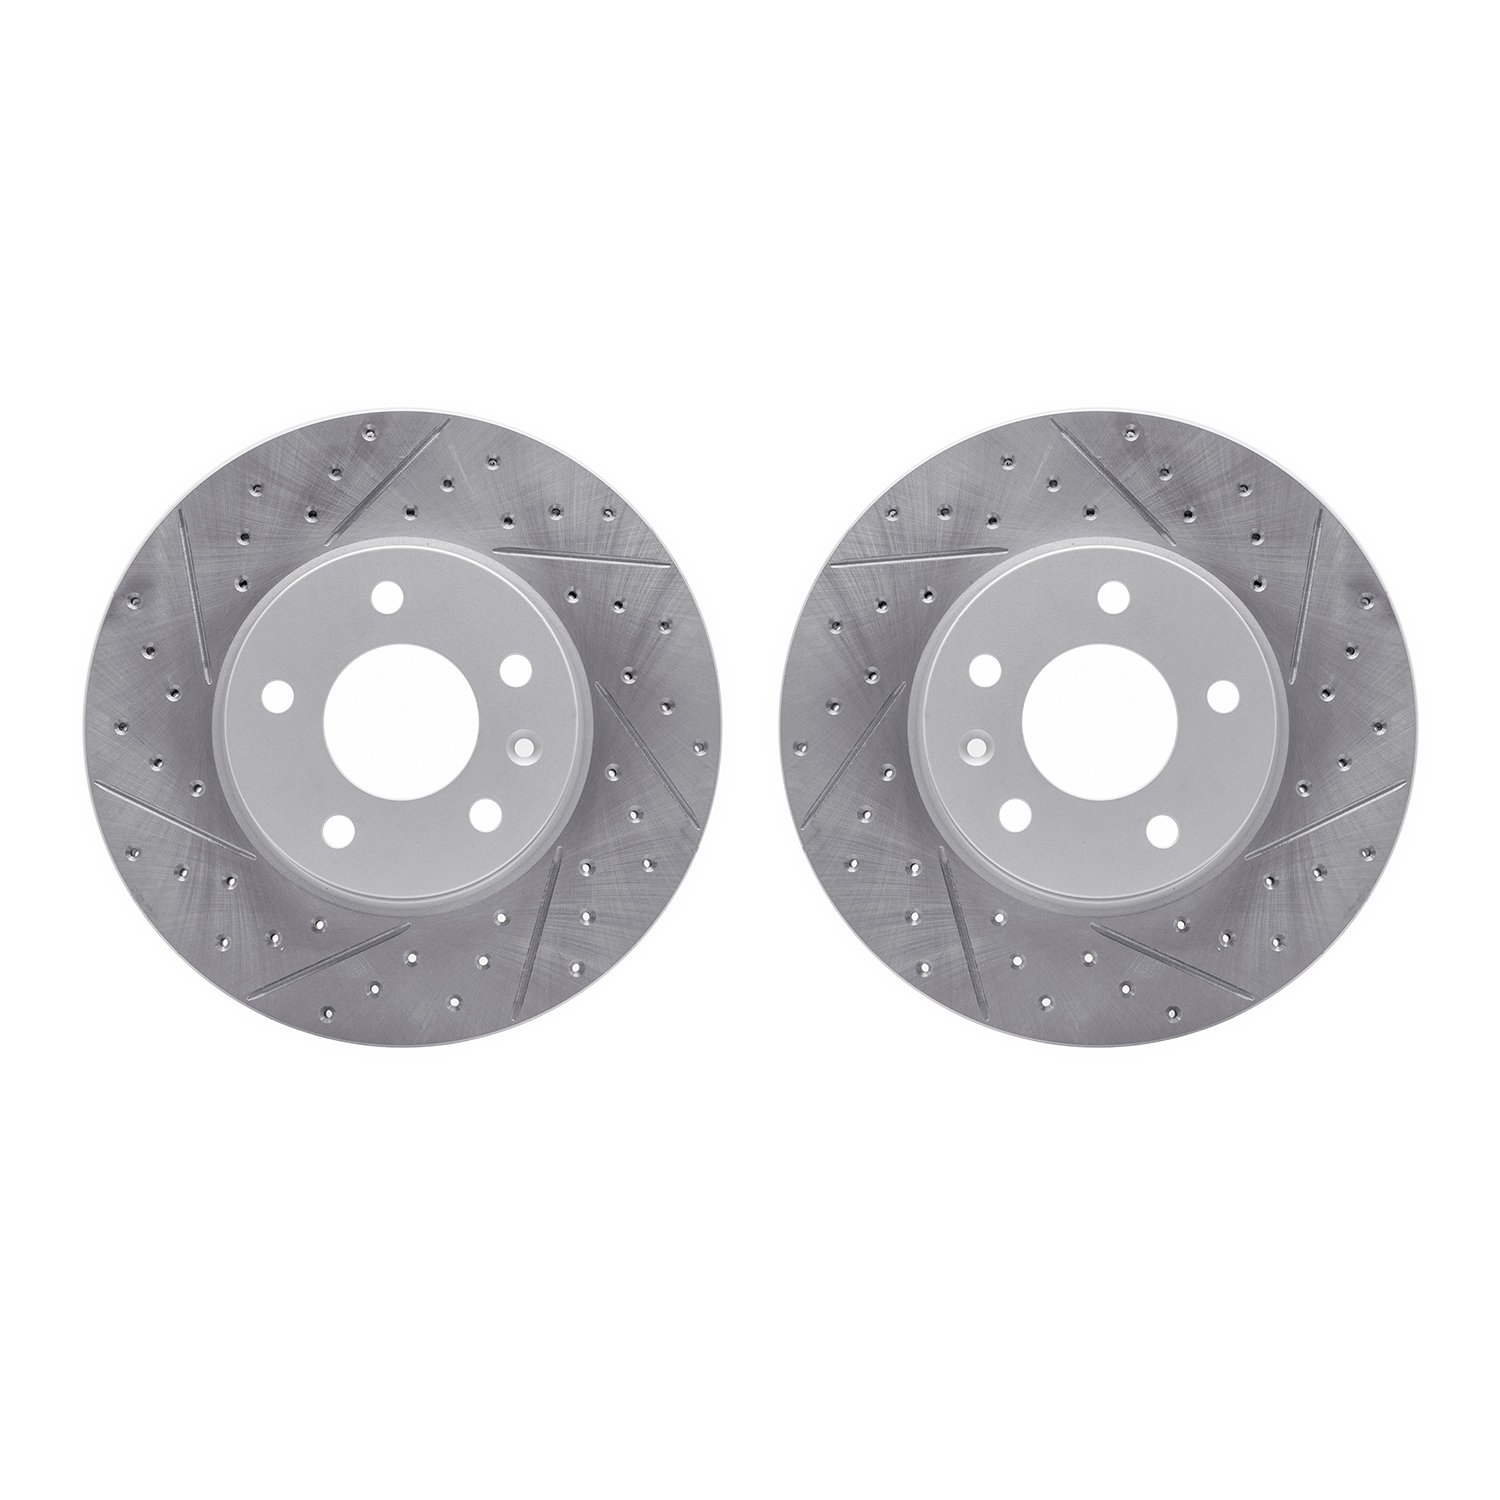 2002-46006 Geoperformance Drilled/Slotted Brake Rotors, Fits Select GM, Position: Front